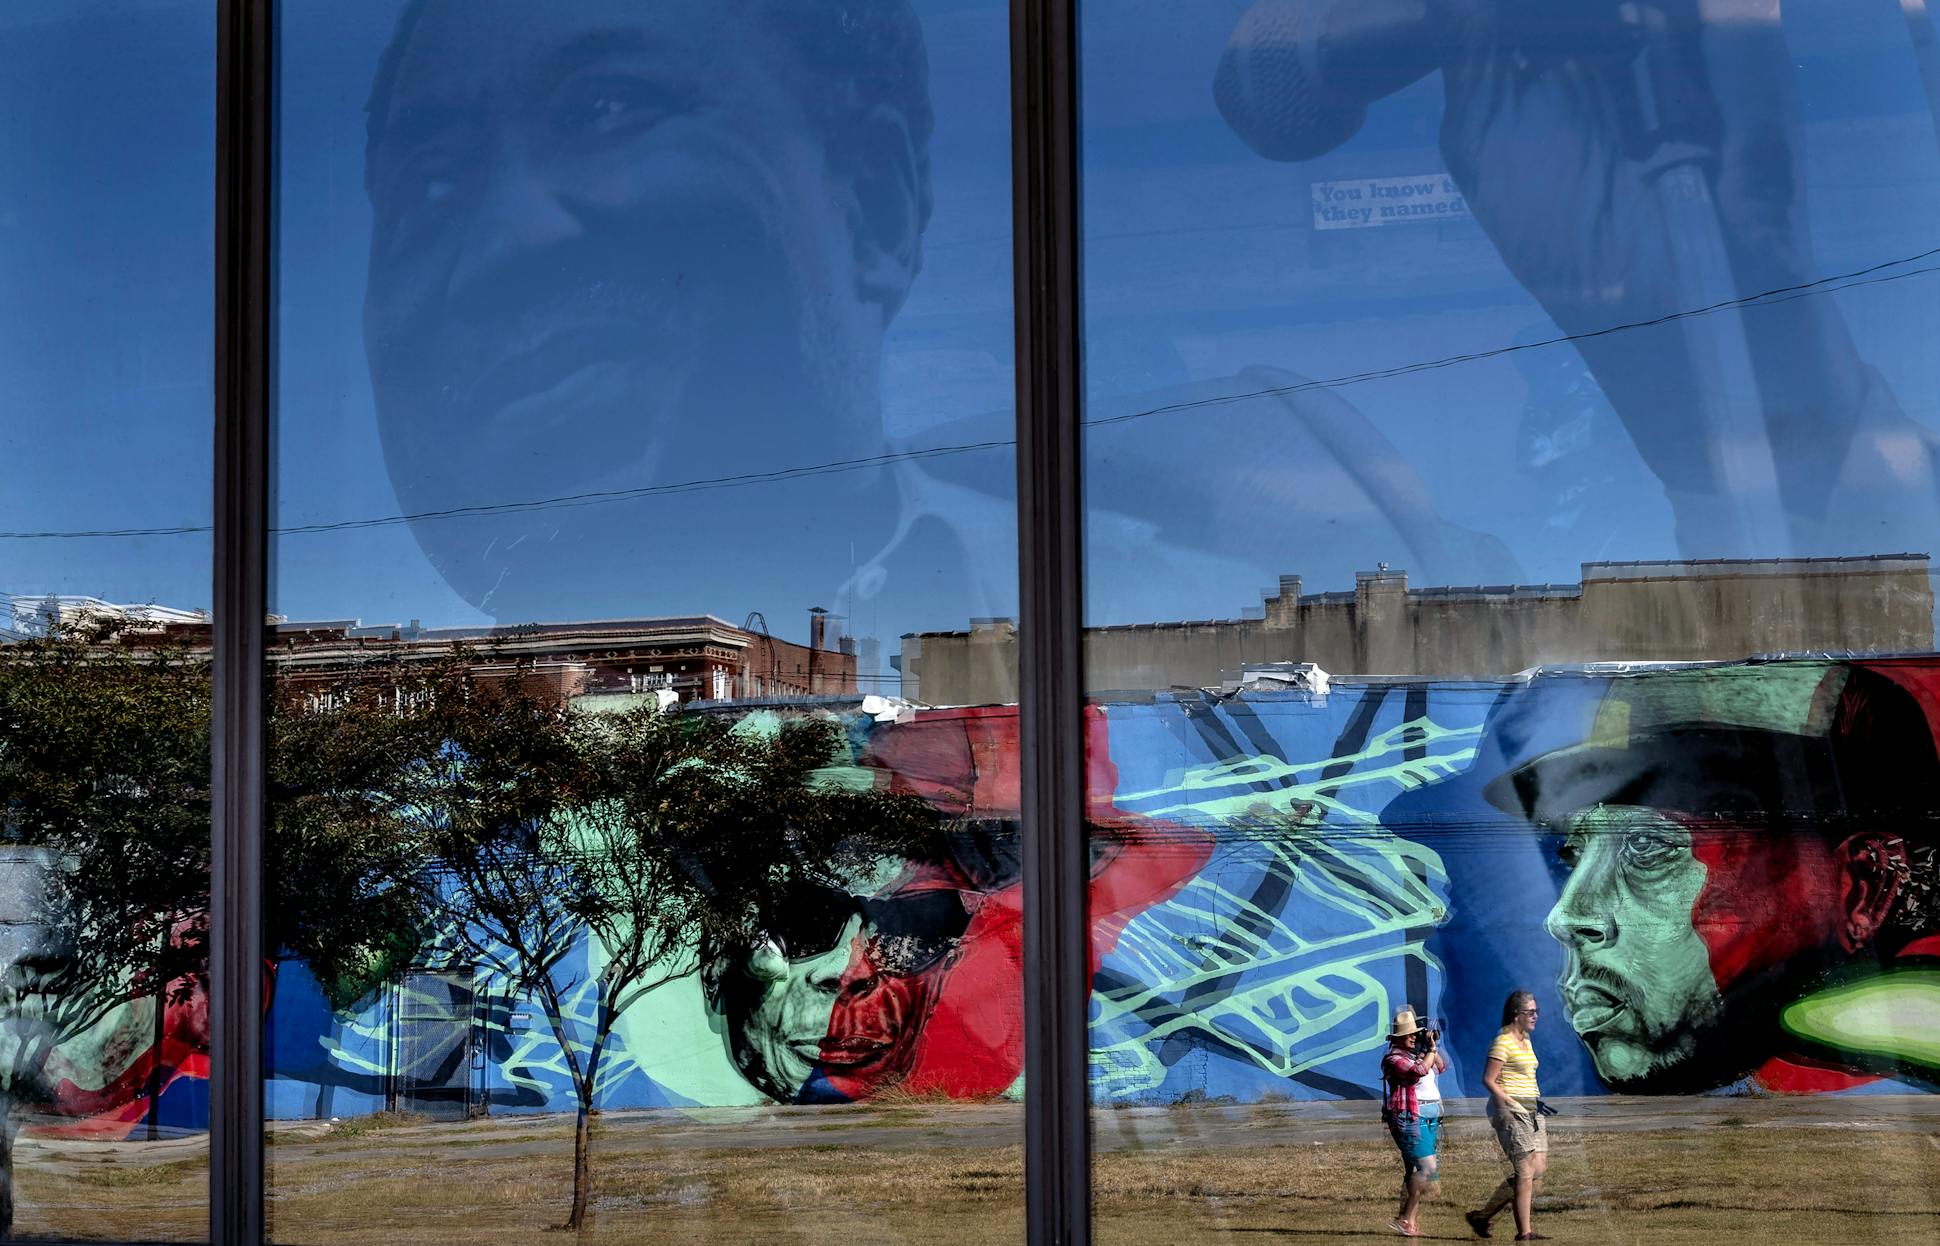 <b>Above:</b> Tourists walked by images of blues icons in Clarksdale: John Lee Hooker on a mural and Muddy Waters on a window of the Delta Blues Museum.<br><b>Below:</b> Jimmy “Duck” Holmes opened the door to the Blue Front Cafe, the area's oldest surviving juke joint, which his parents opened in Bentonia in 1948 to feed sharecroppers.